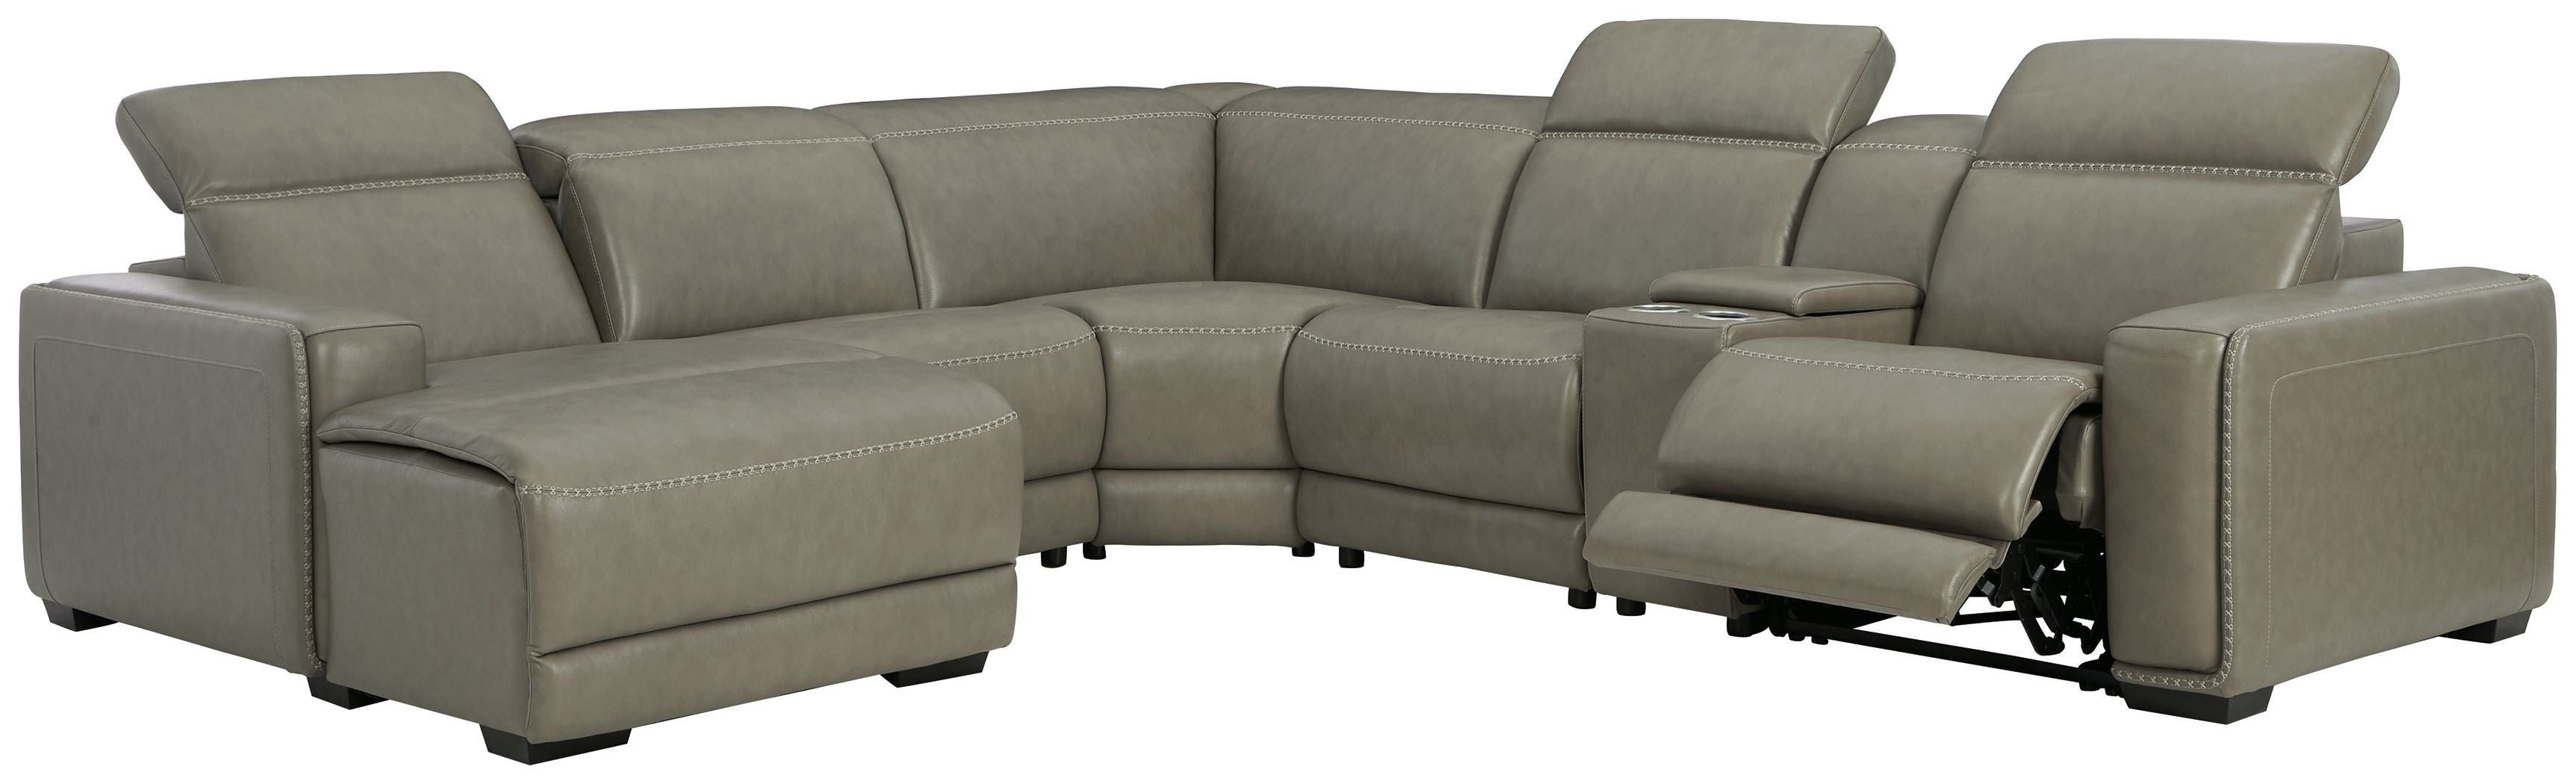 Correze Gray Leather Power Reclining Sectional